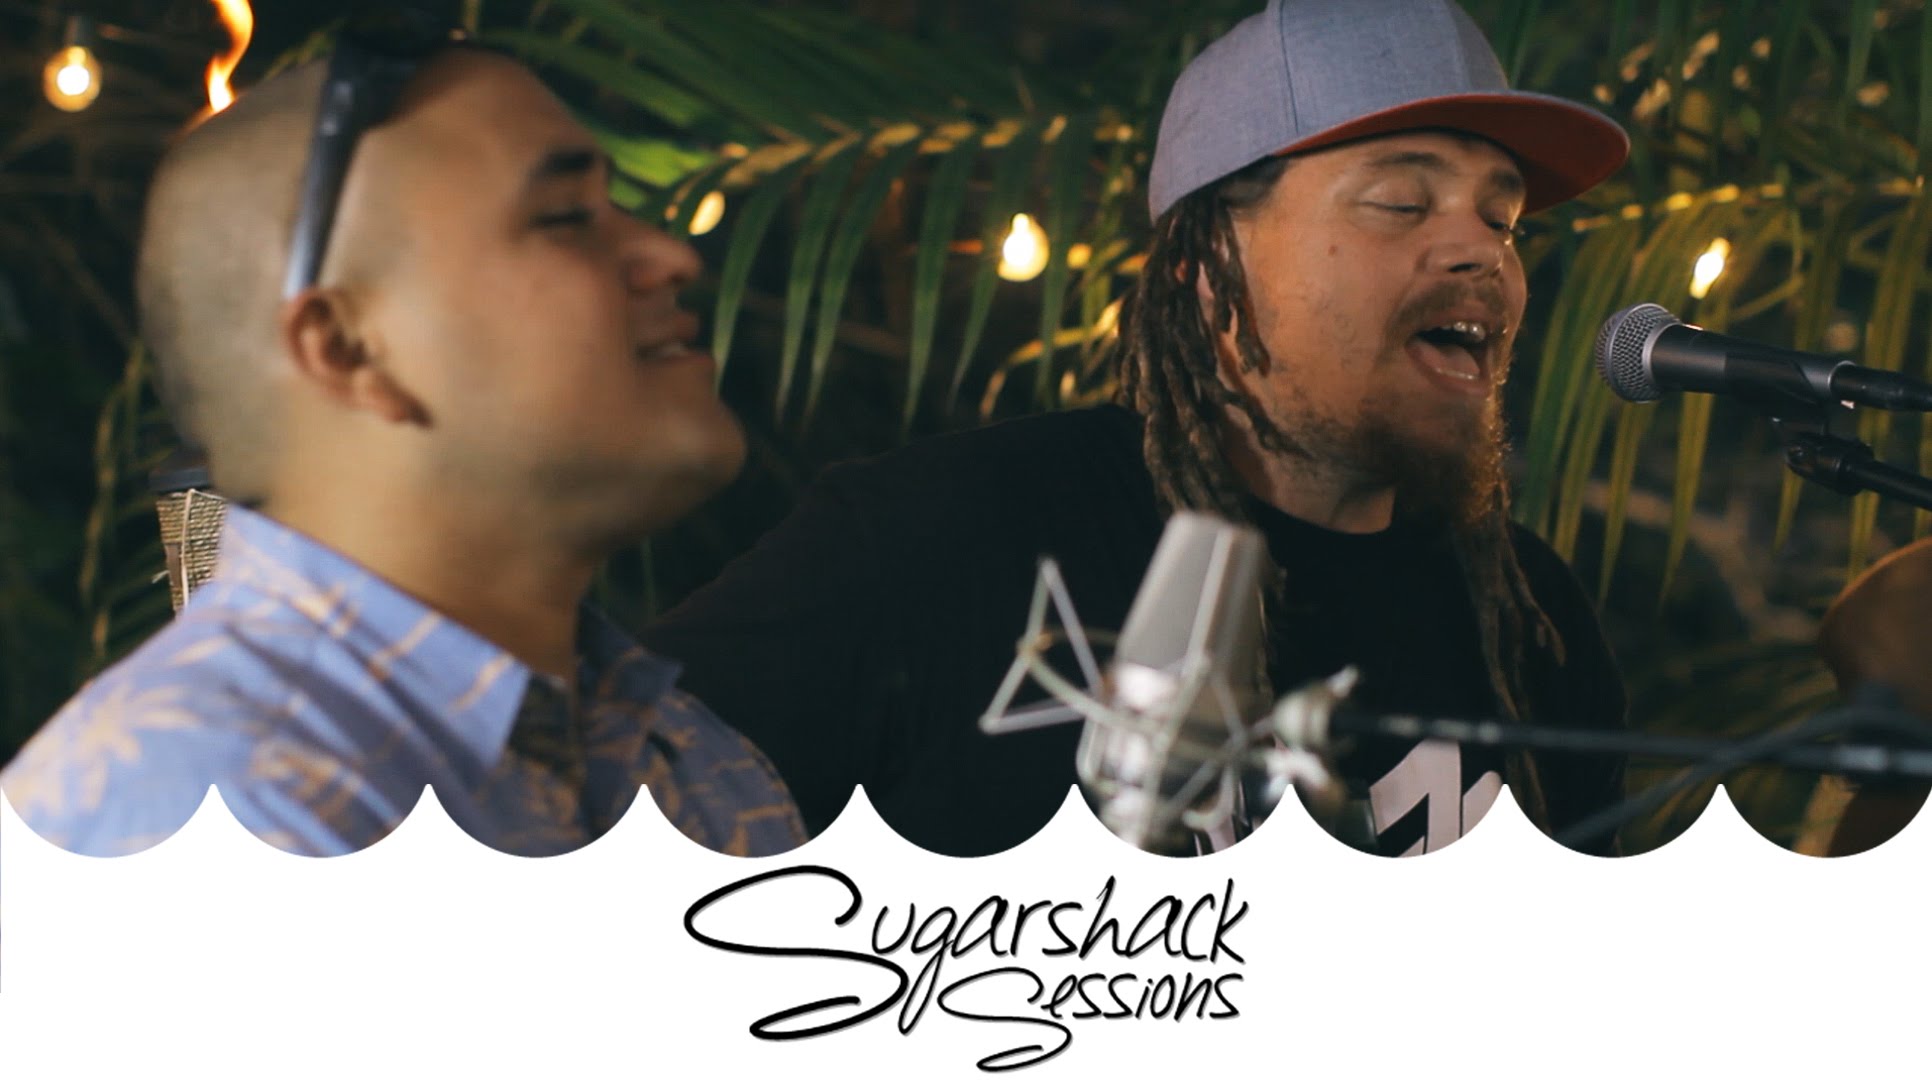 The Green - Come In @ Sugarshack Sessions [10/27/2015]